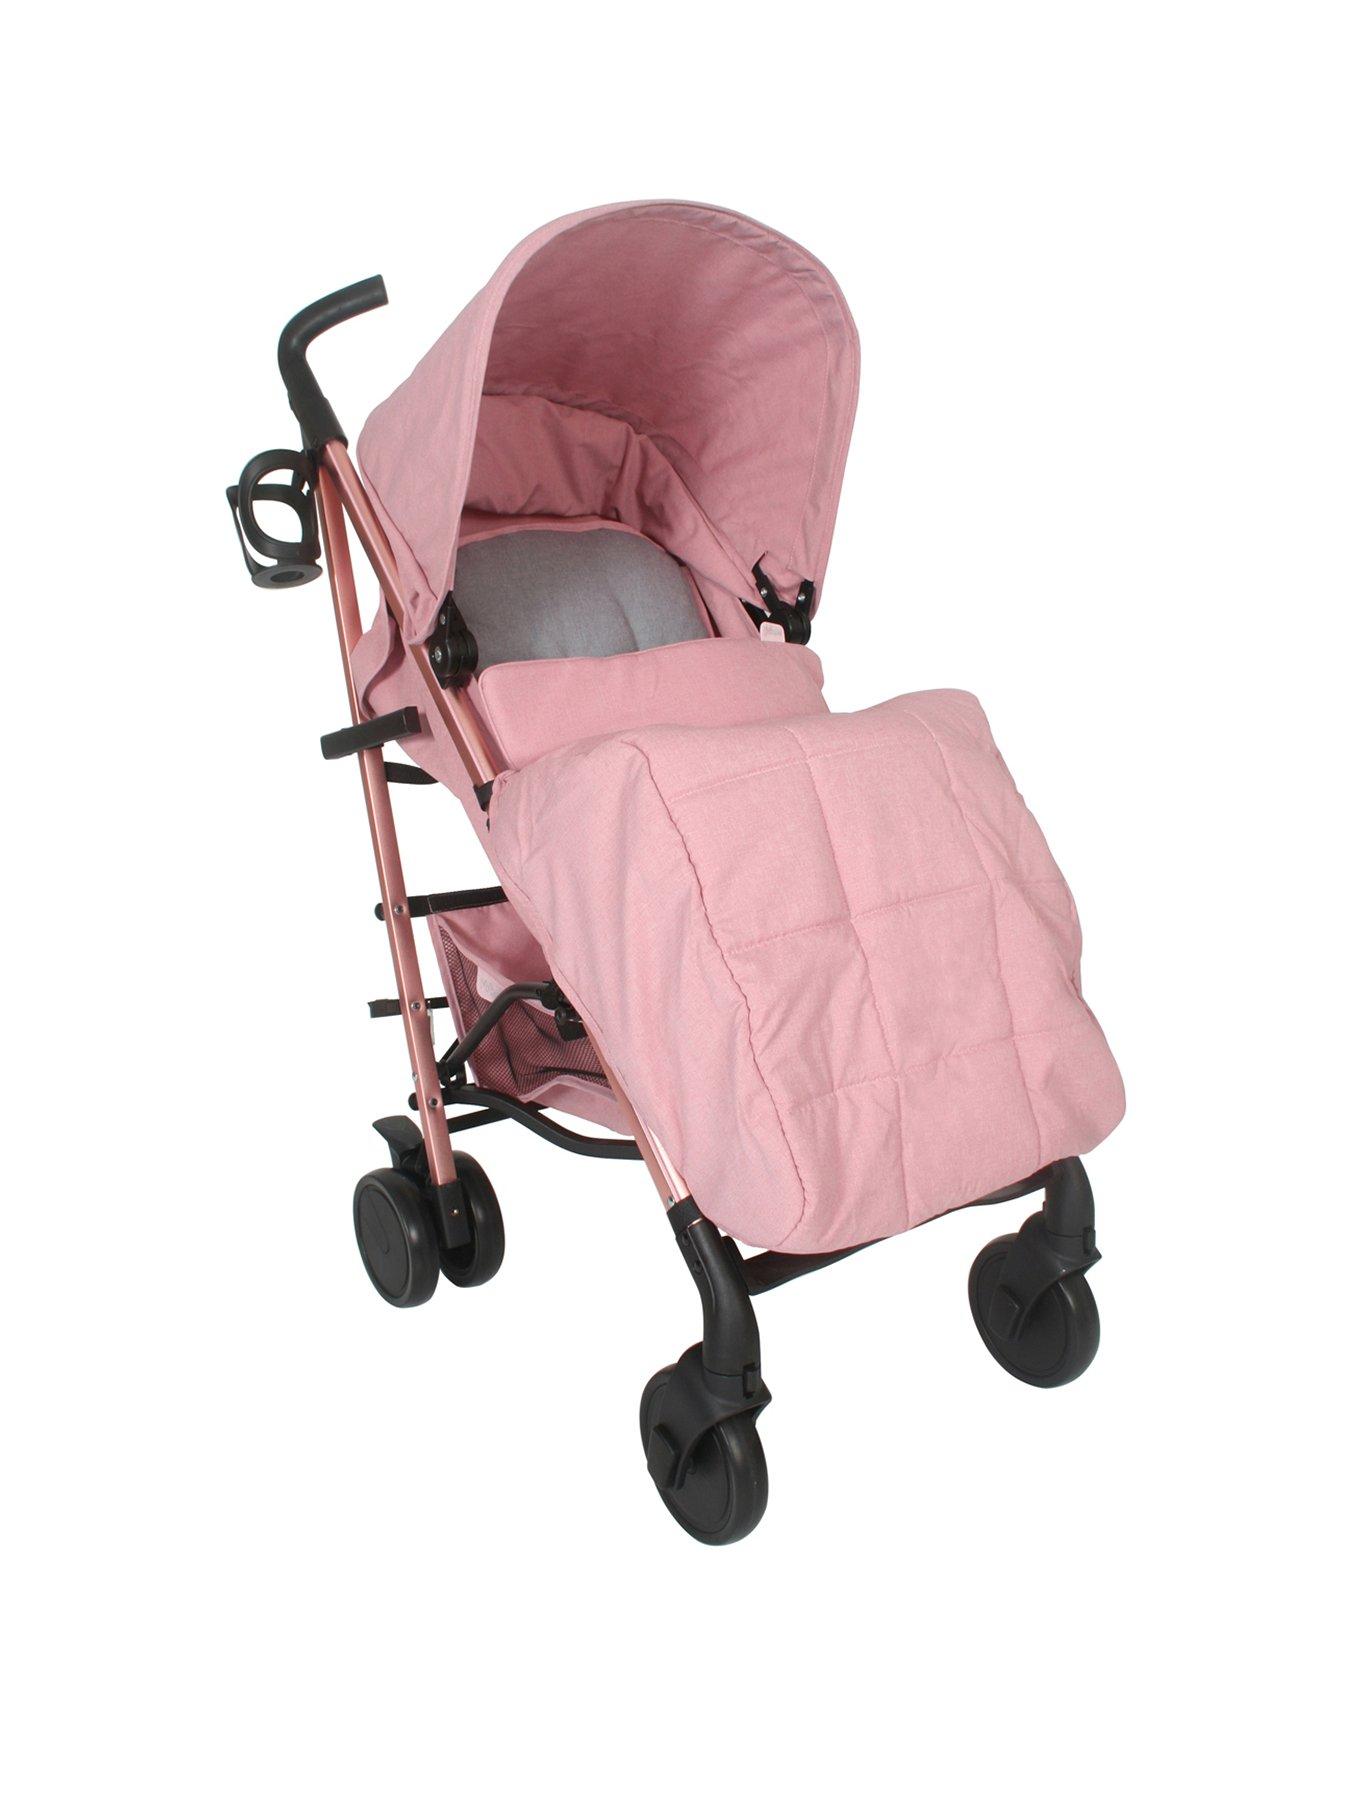 My Babiie Katie Piper MB51 Pushchair Rose Gold & Grey 